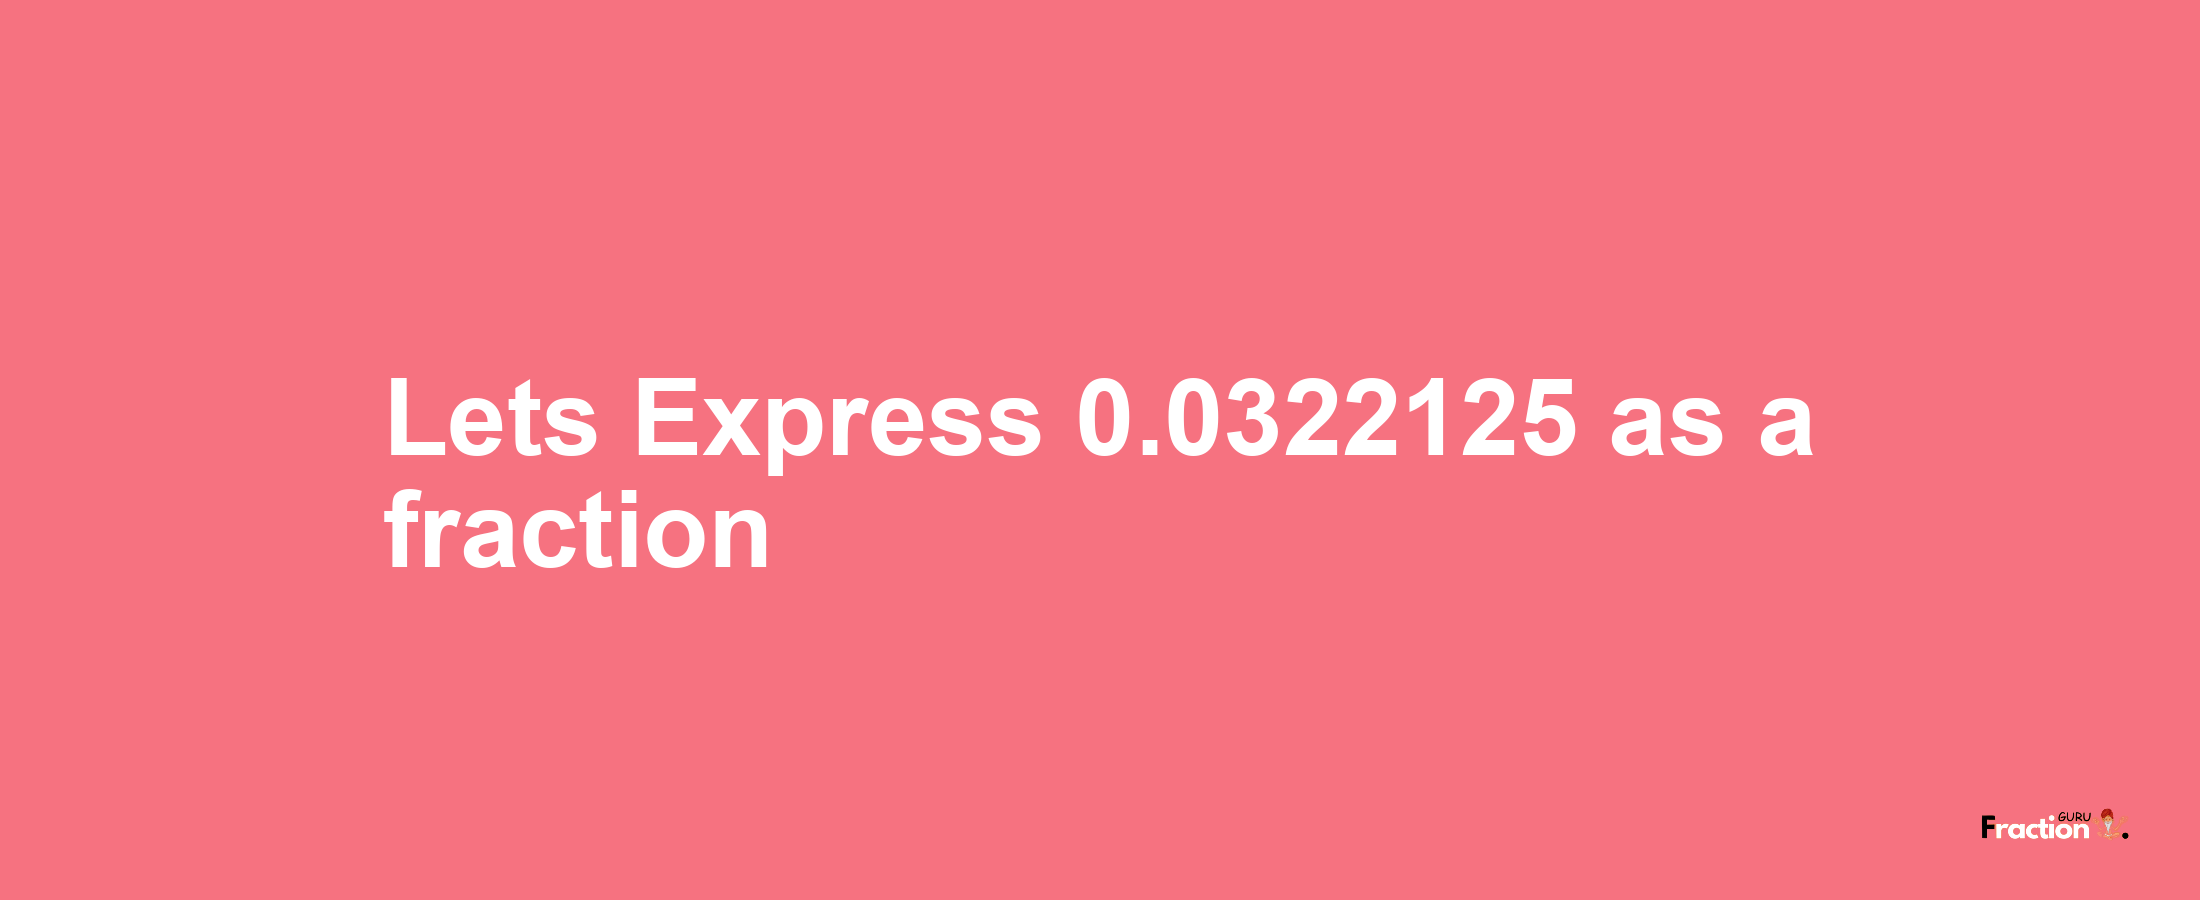 Lets Express 0.0322125 as afraction